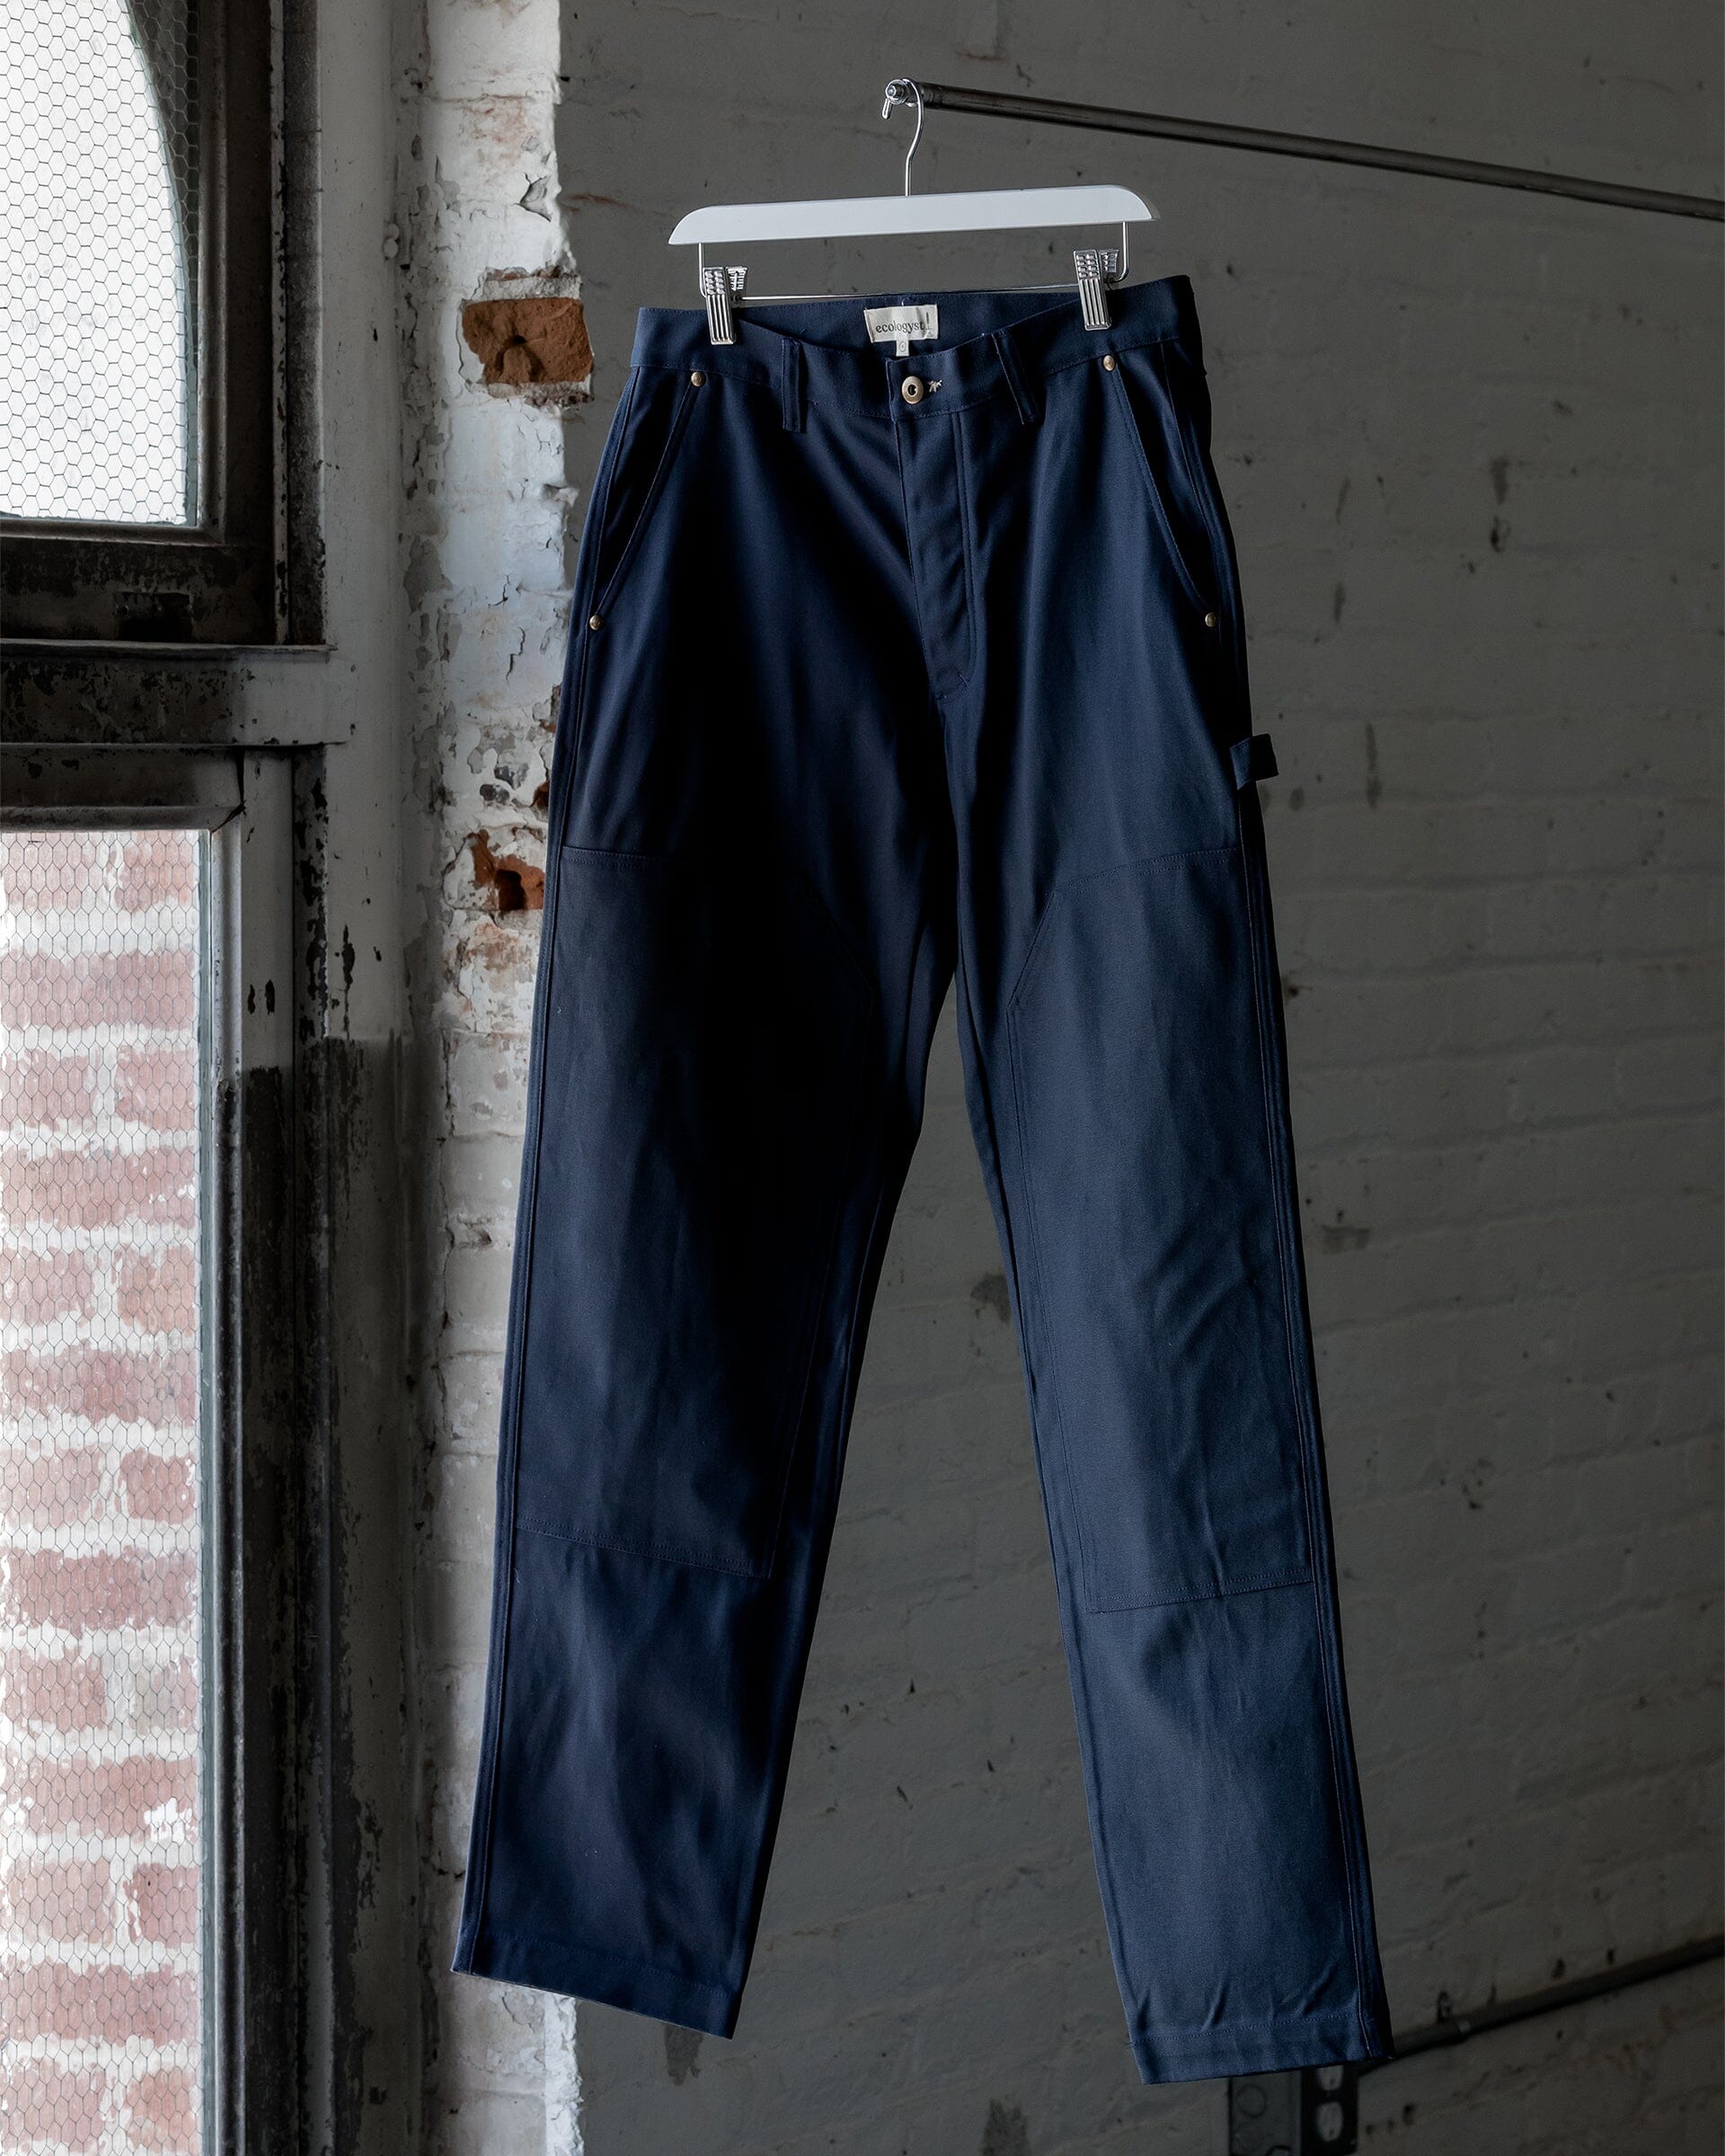 Men's Canvas Workwear Pant in Clay